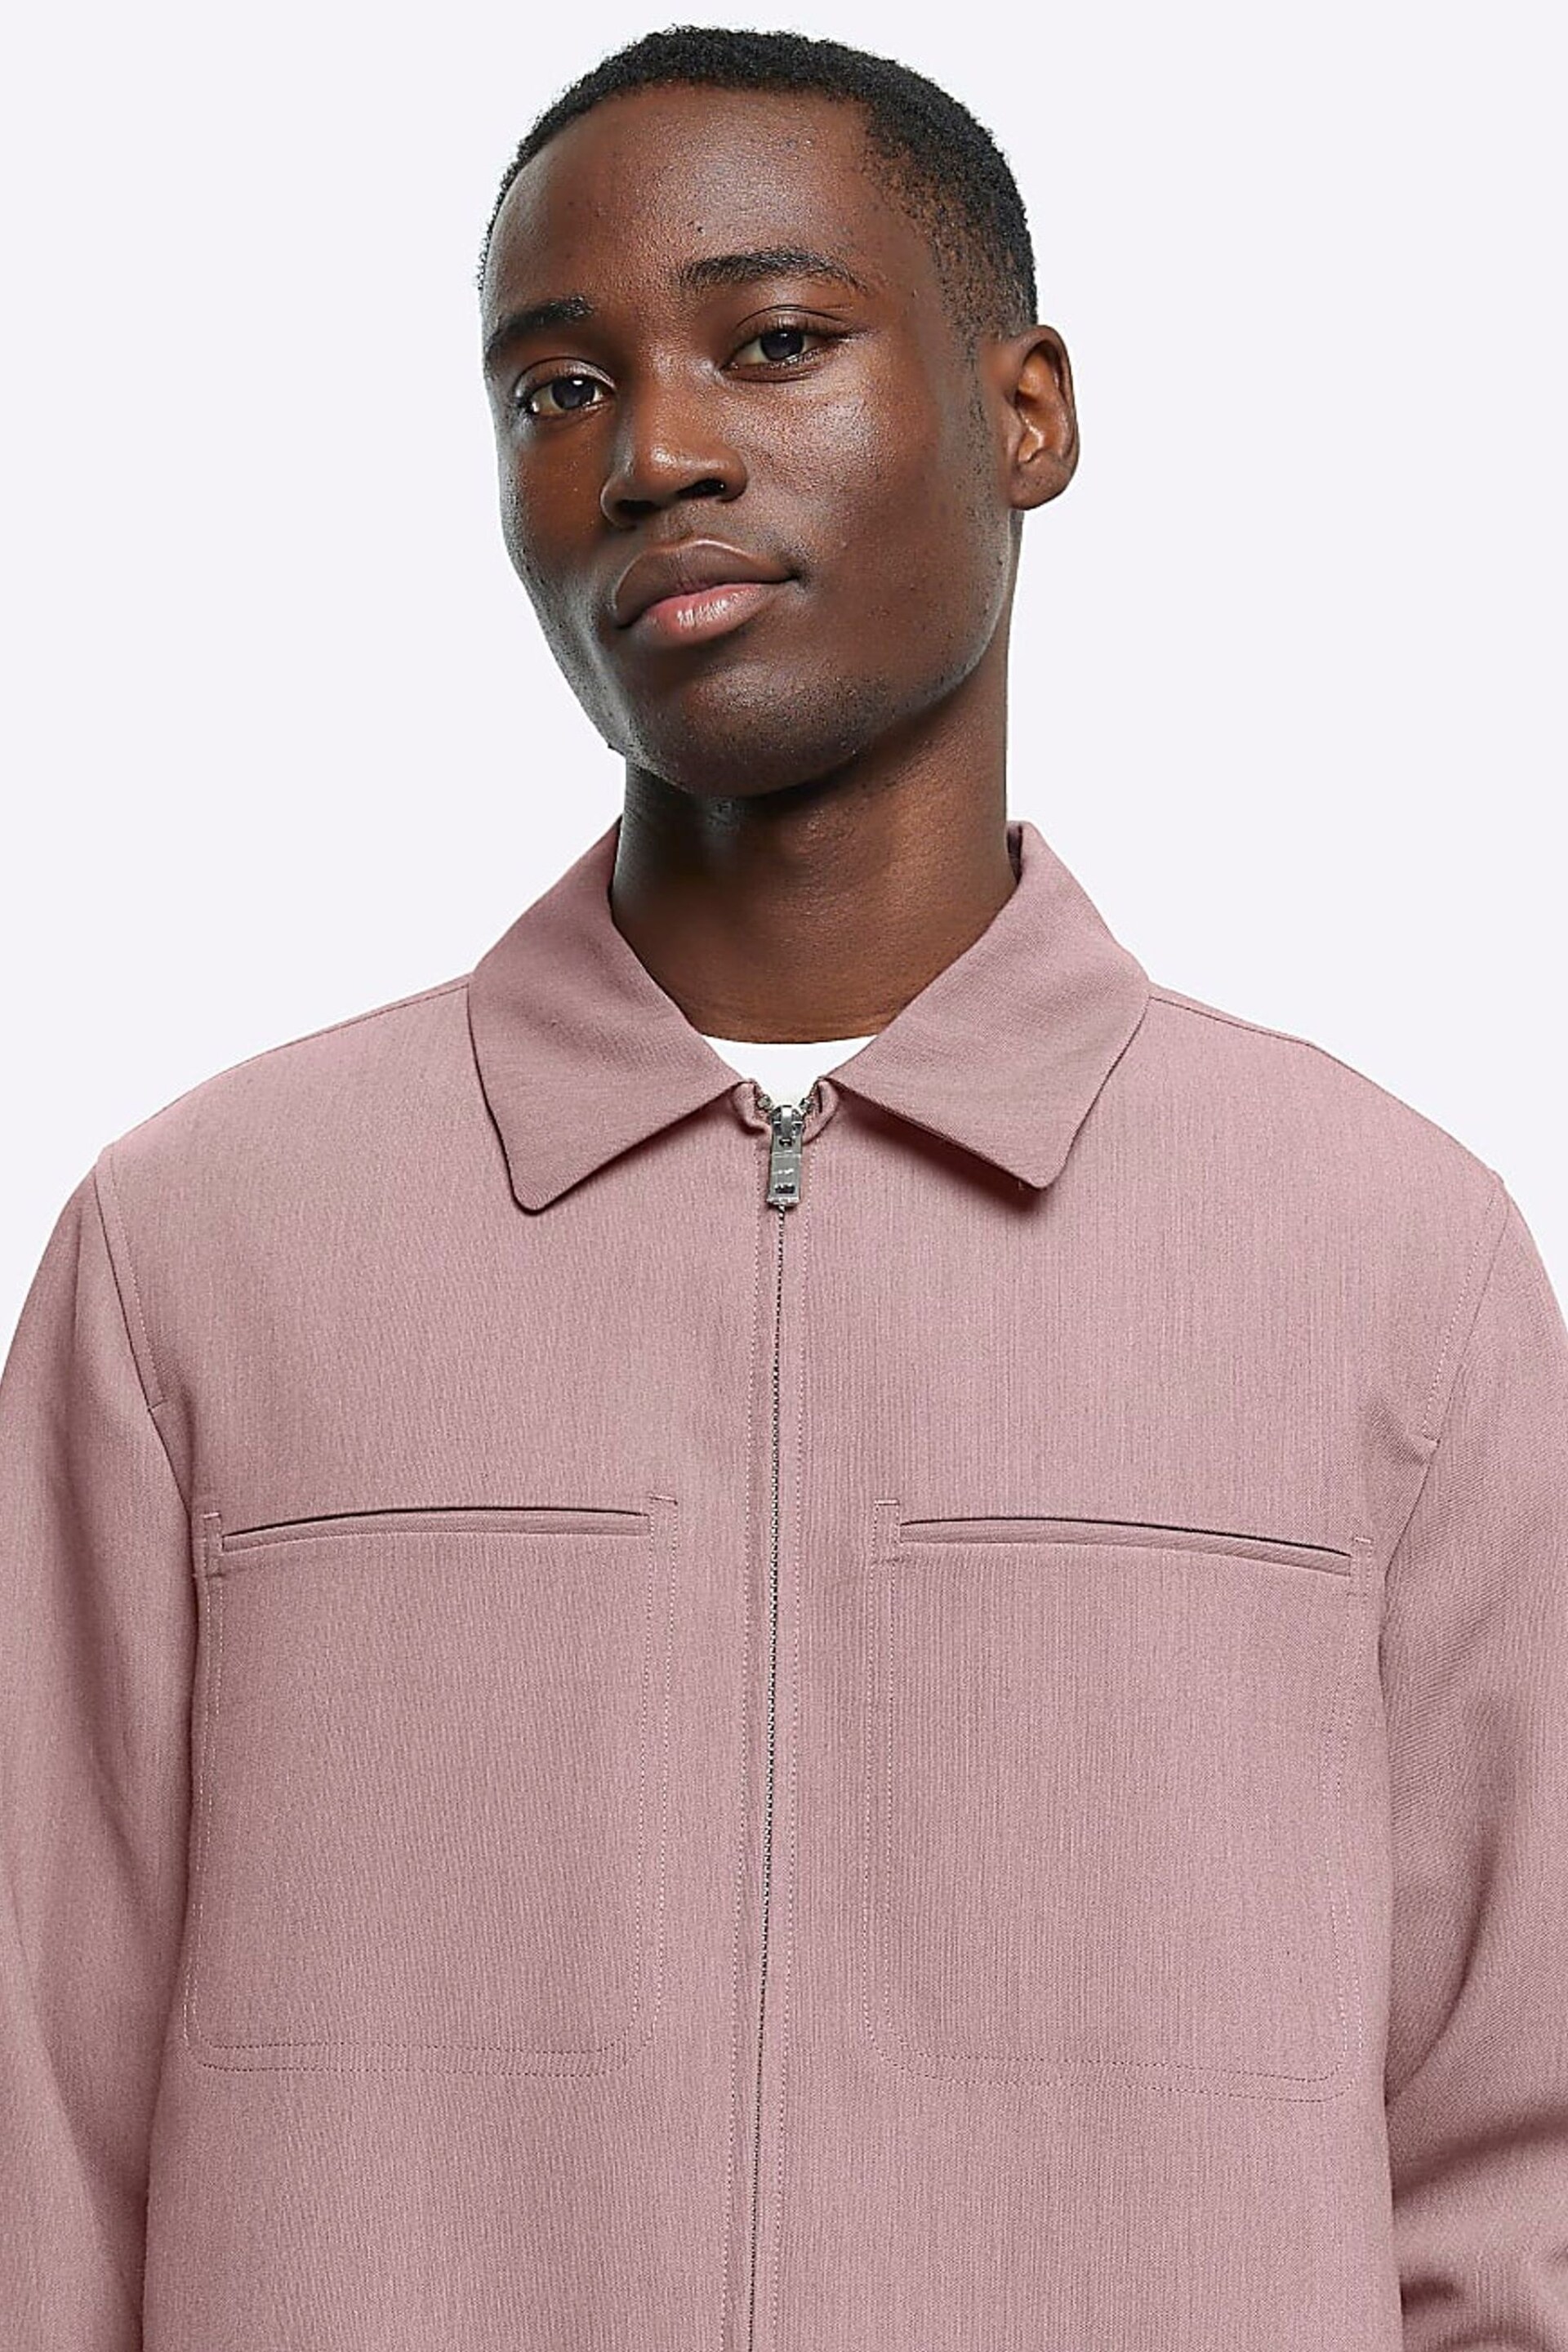 River Island Pink Long Sleeve Essential Crew Jacket - Image 4 of 6